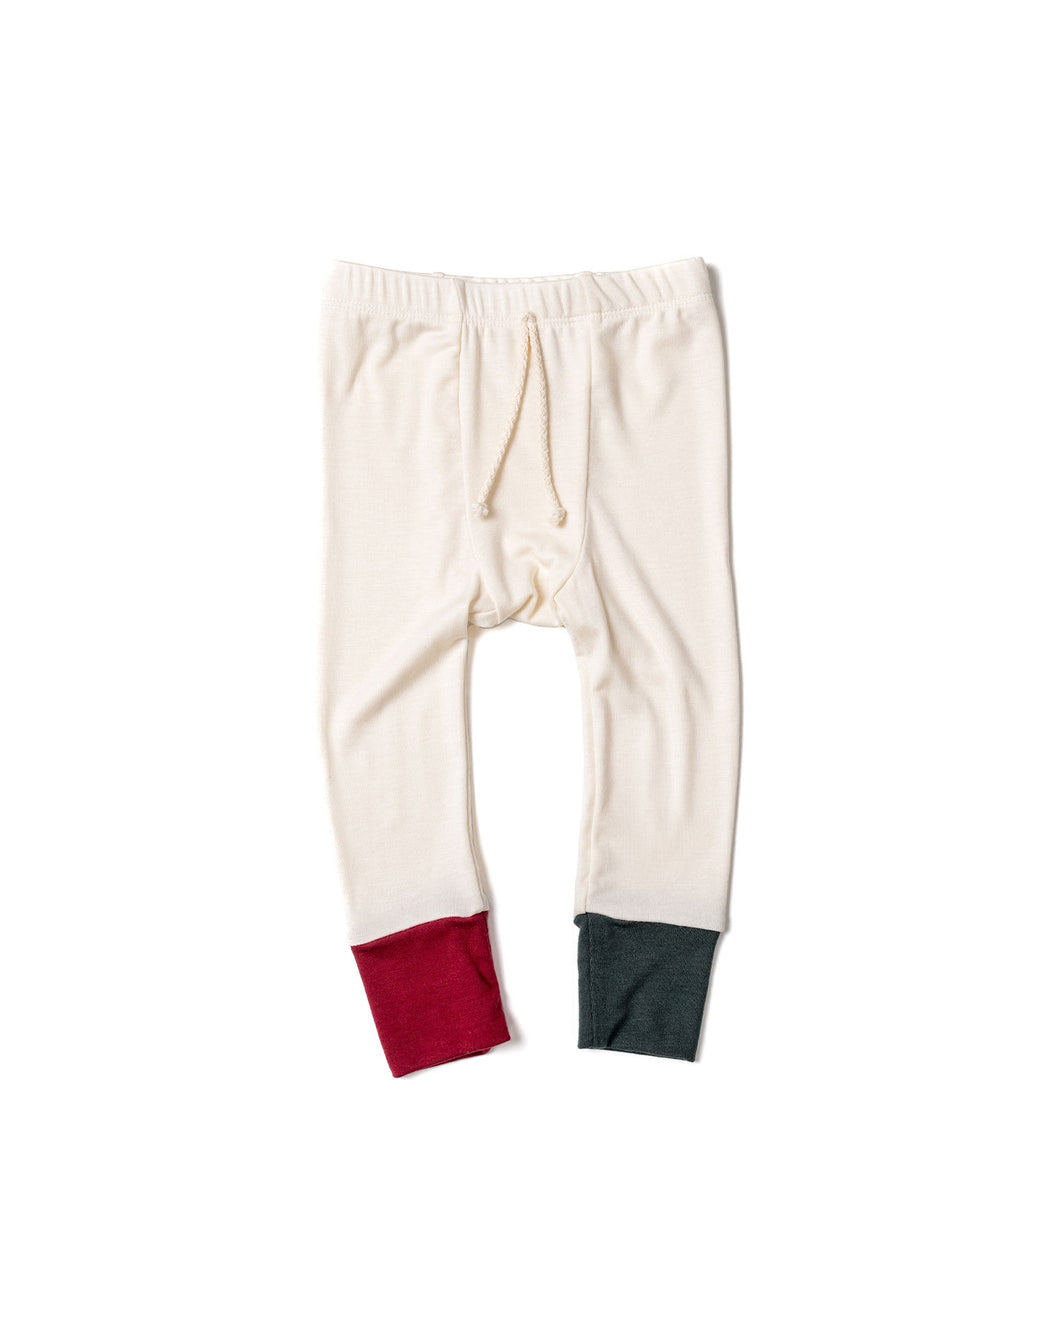 rib knit pant - natural and stocking red and wreath green contrast